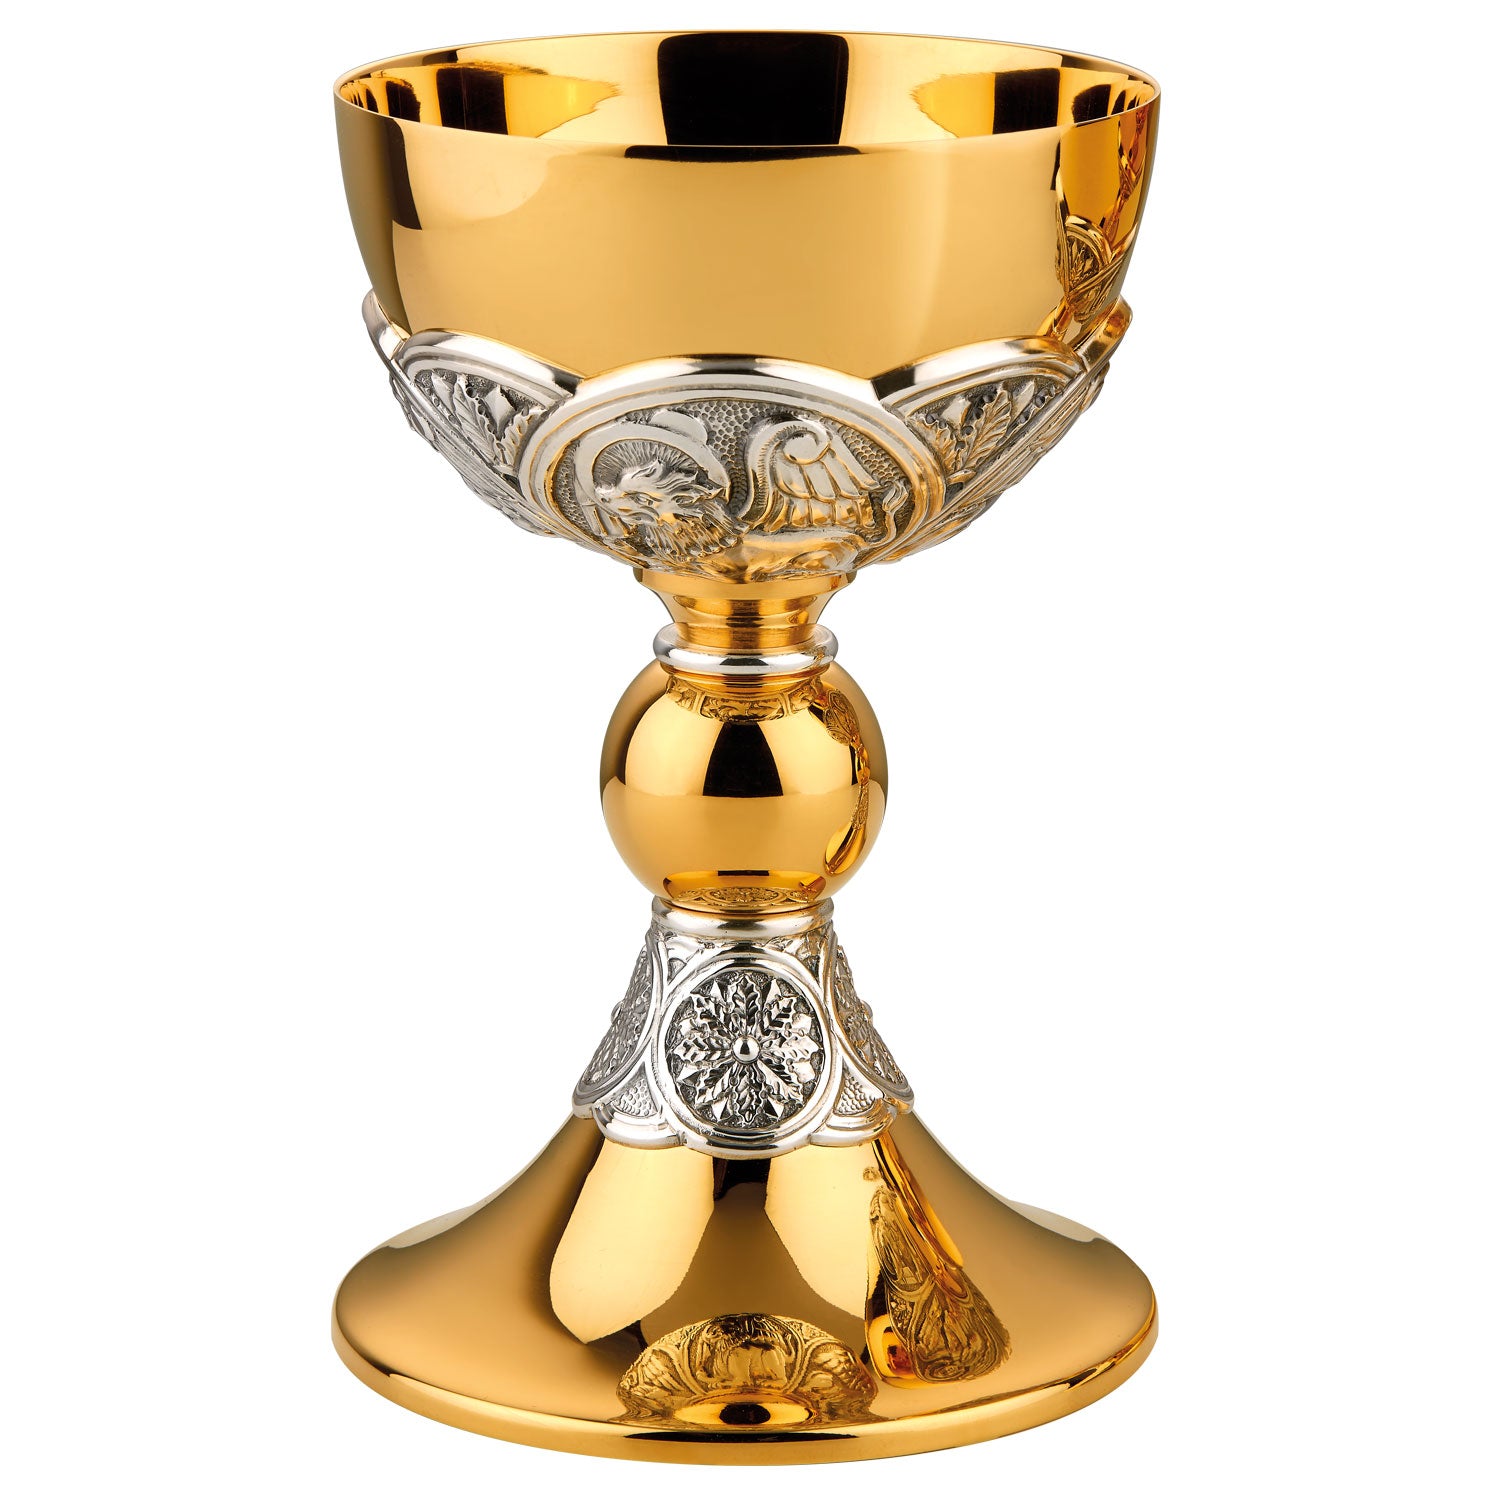 Two Tone Chalice with Four Evangelists and Floral Motif